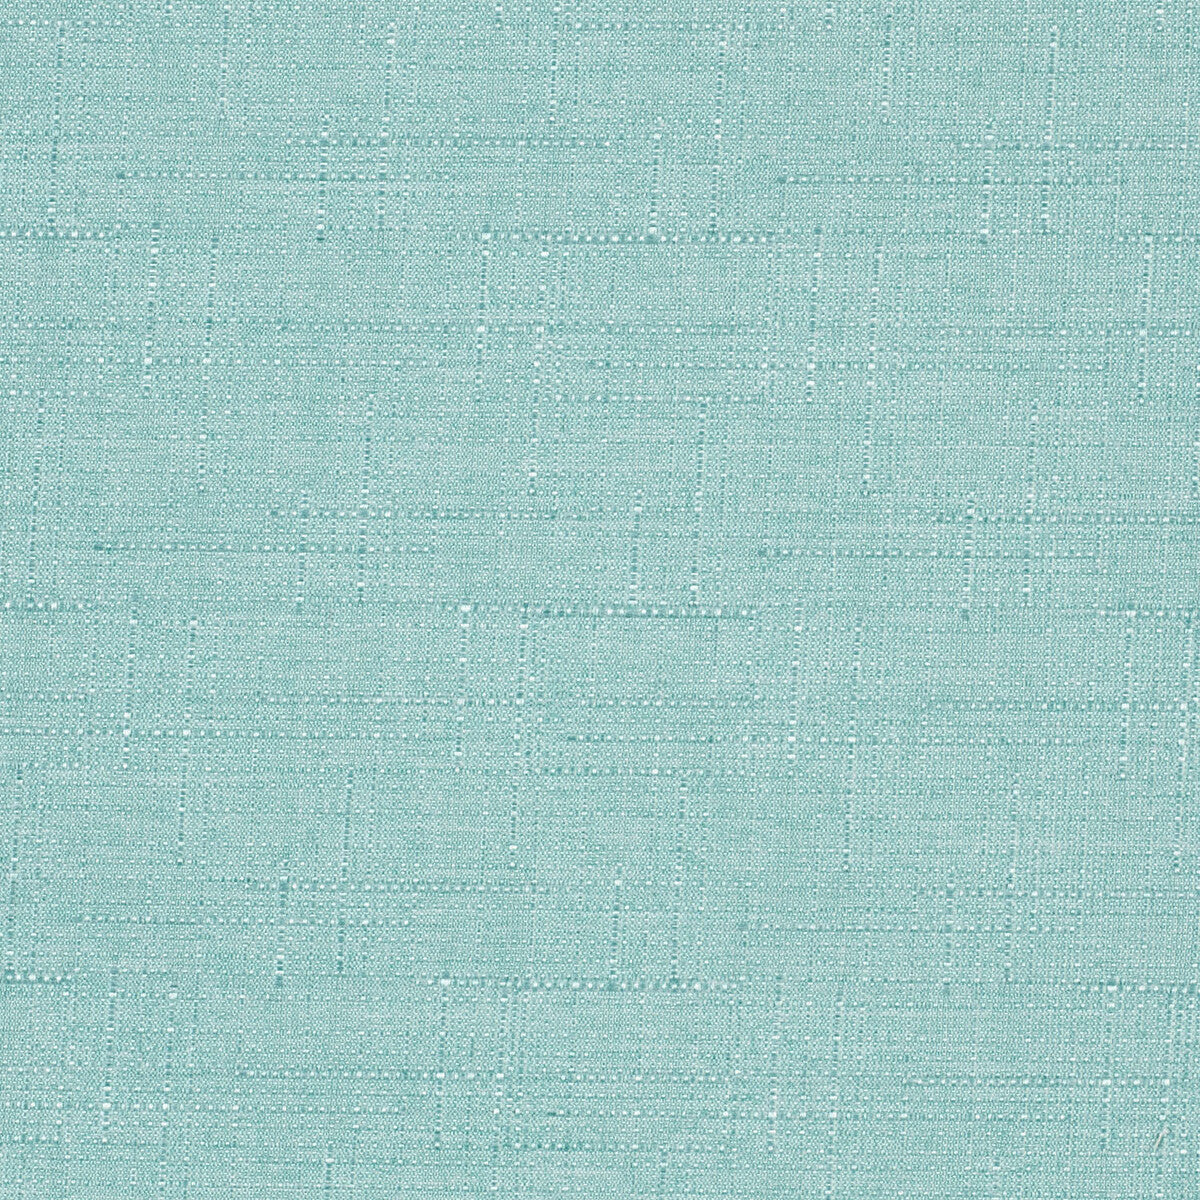 Kravet Contract fabric in 4321-15 color - pattern 4321.15.0 - by Kravet Contract